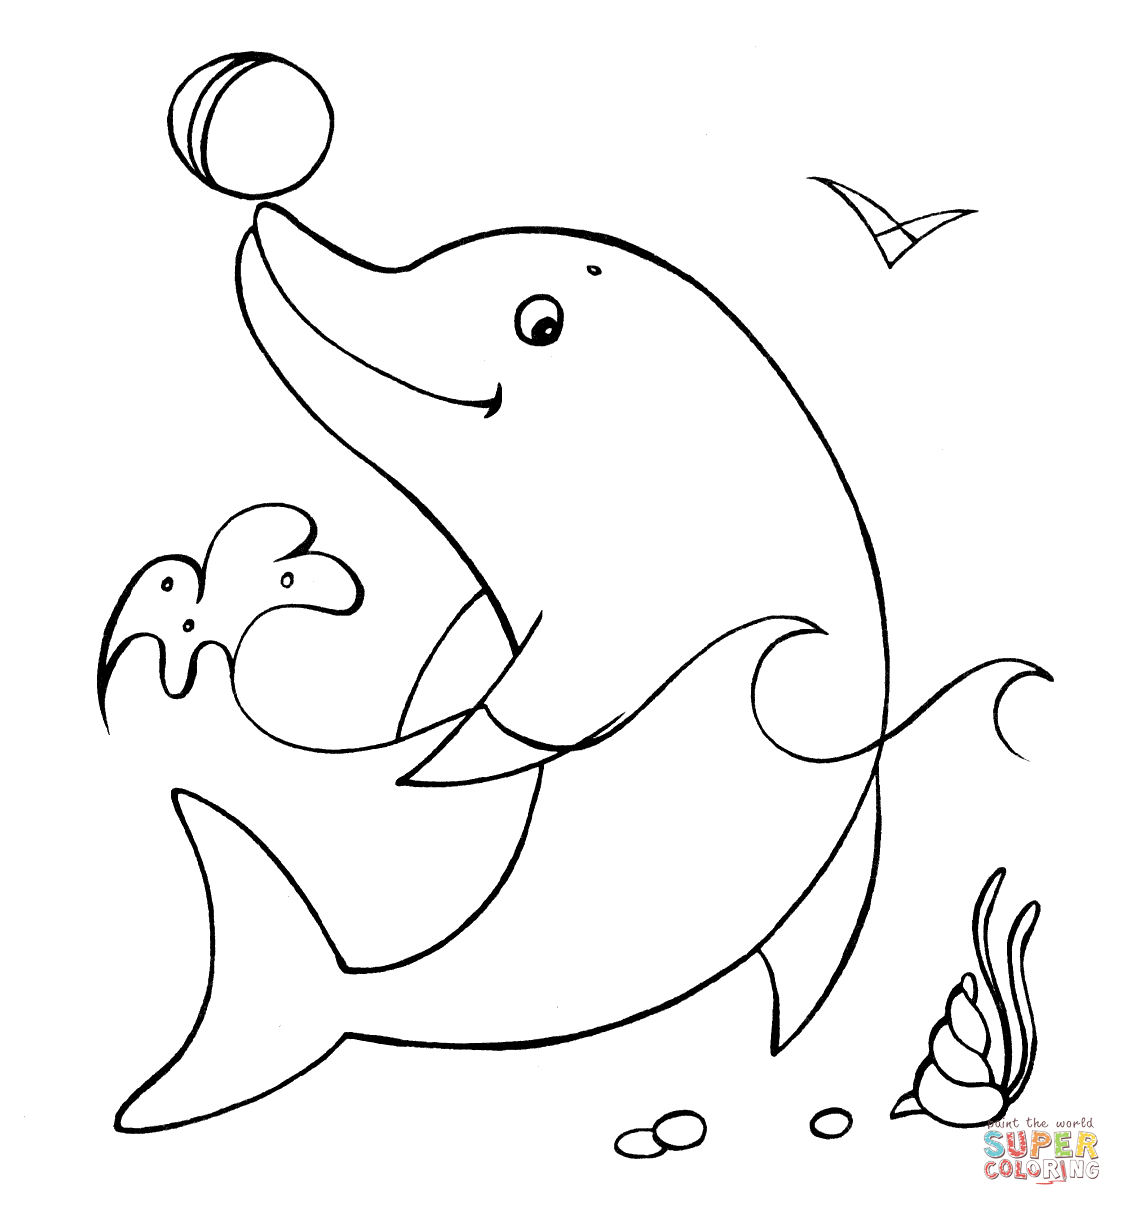 Dolphins coloring #5, Download drawings